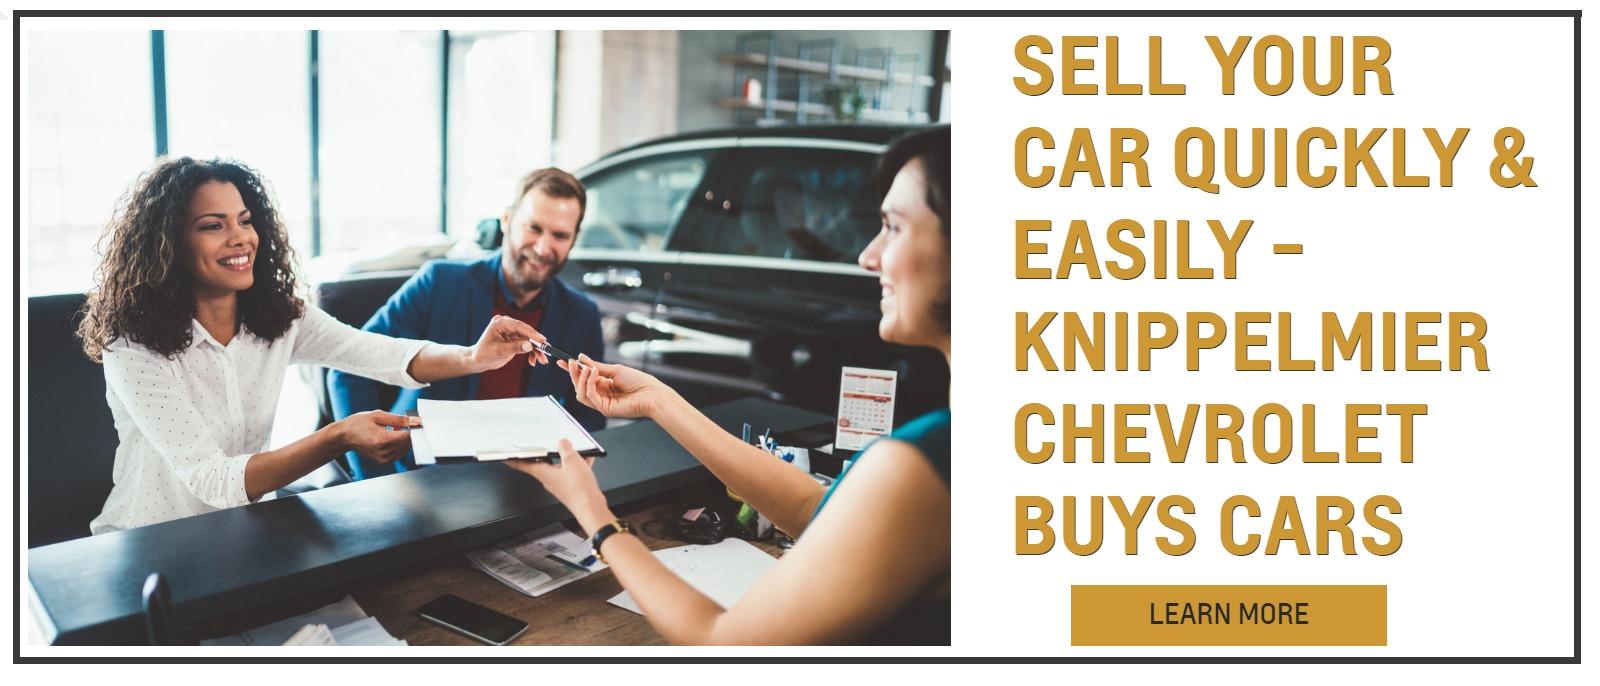 SELL YOUR CAR QUICKLY & EASILY - Knippelmier Chevrolet BUYS CARS
Include a nice lifestyle image that indicates a sale is going on.